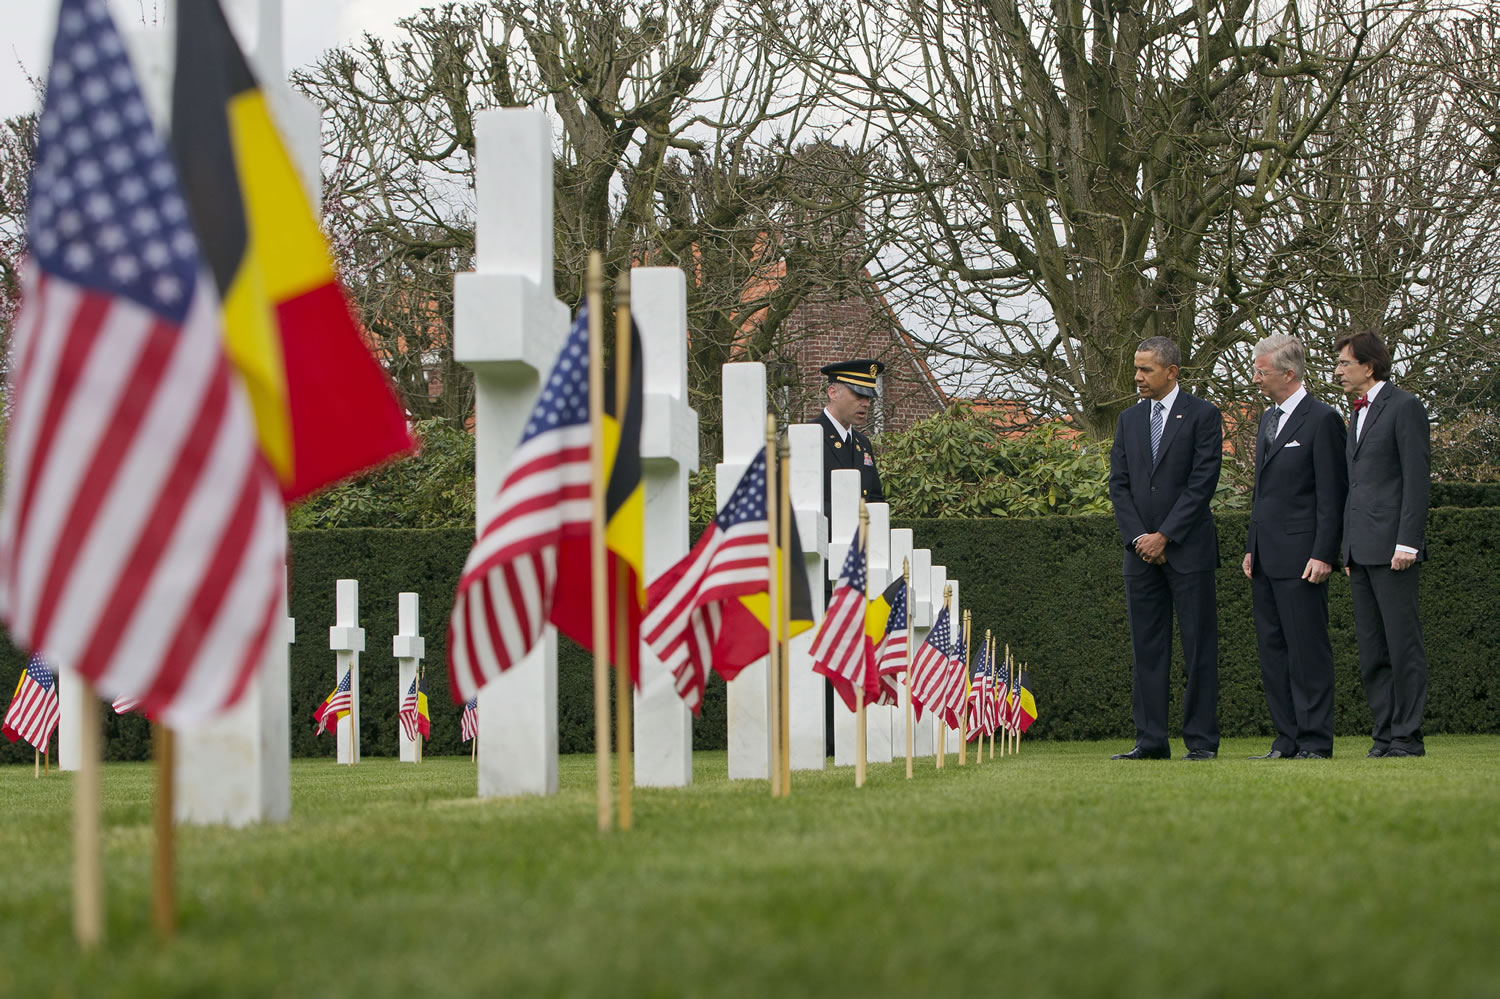 US President Barack Obama, third right, tours the American cemetery at Flanders Field with Belgian King Phillippe and Belgian Prime Minister Elio Di Rupo, far right, in Waregem, Belgium, on Wednesday.